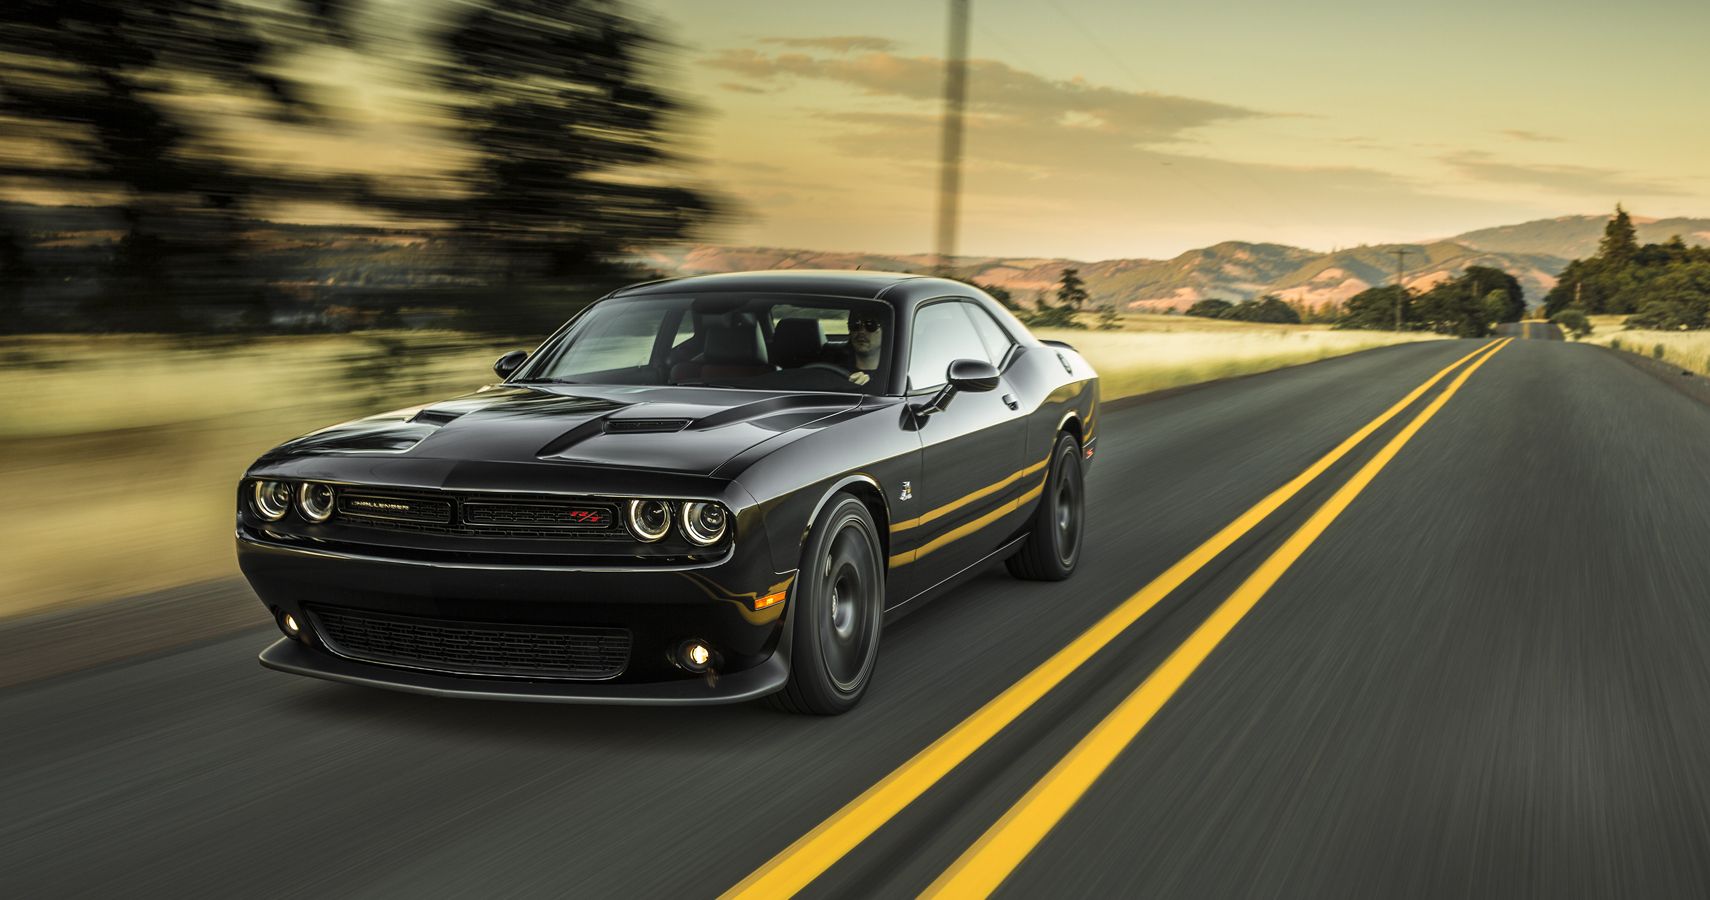 This Is How The Dodge Challenger Evolved In The Past 50 Years